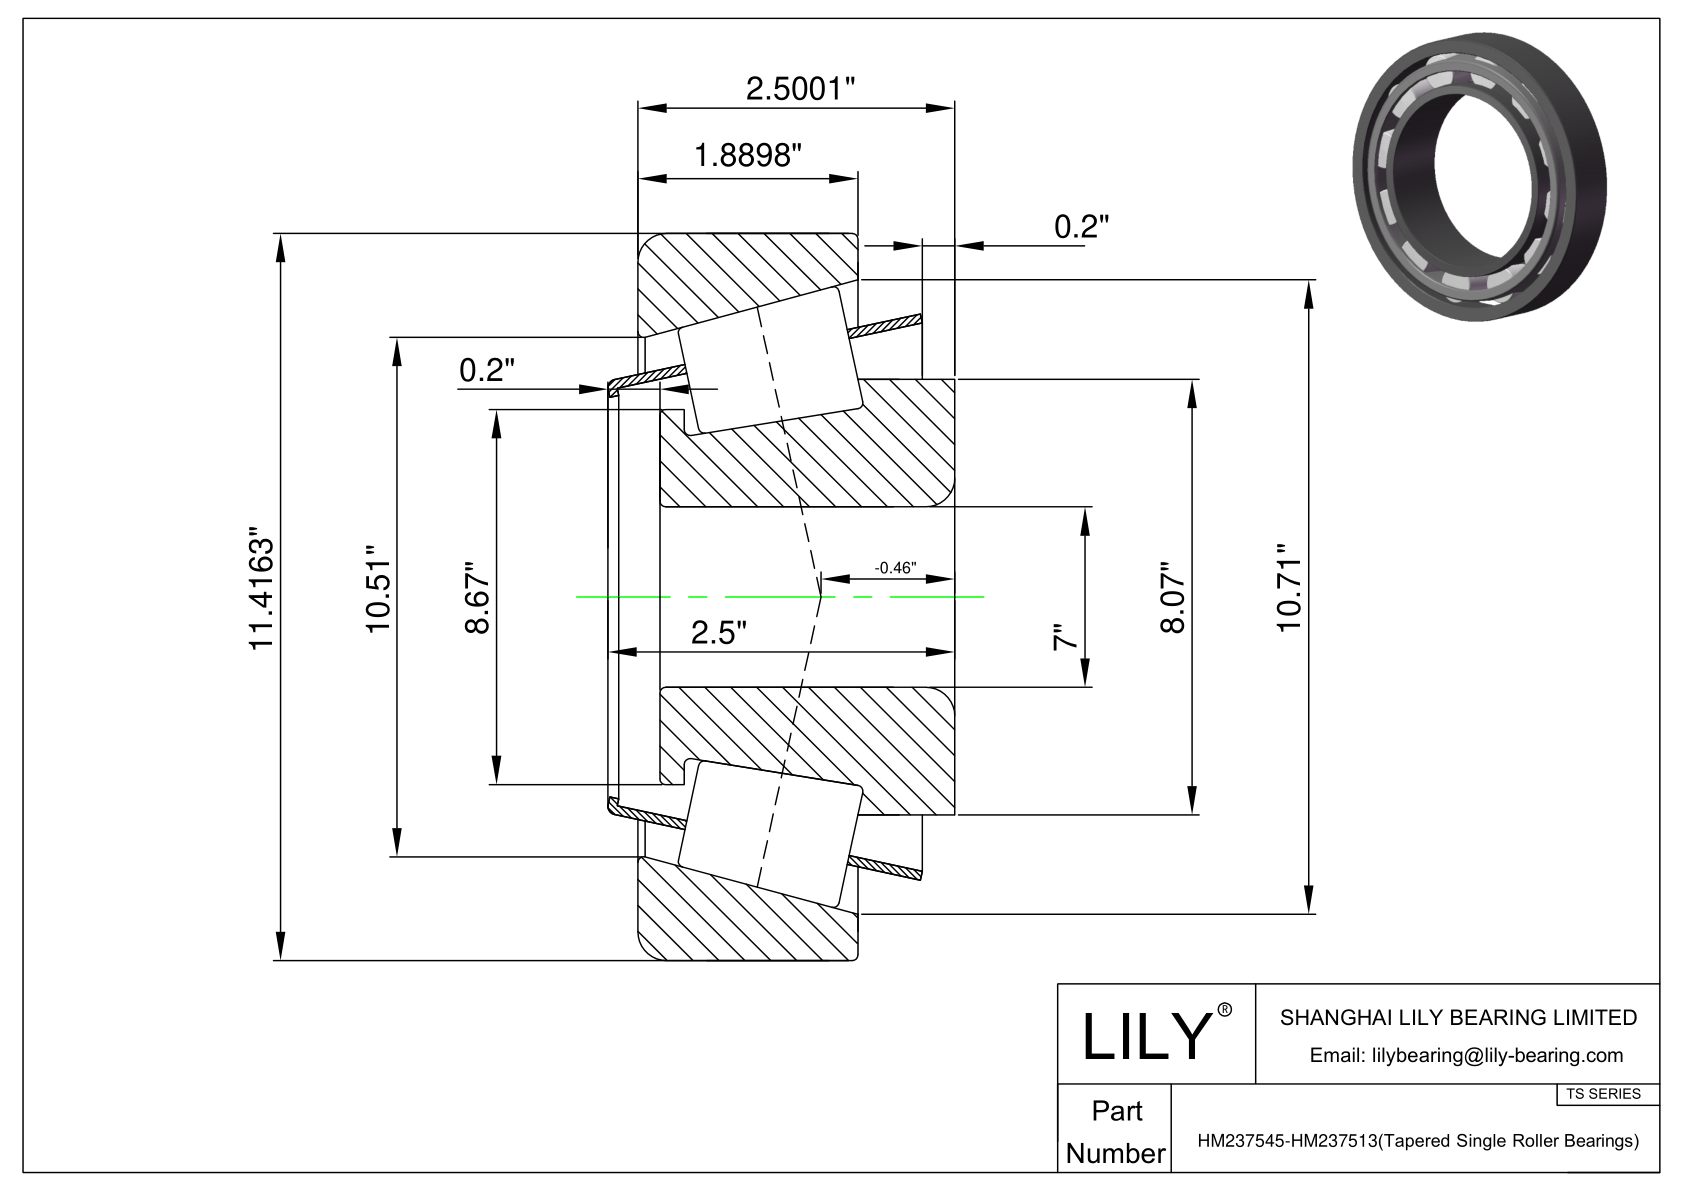 HM237545-HM237513 TS (Tapered Single Roller Bearings) (Imperial) cad drawing